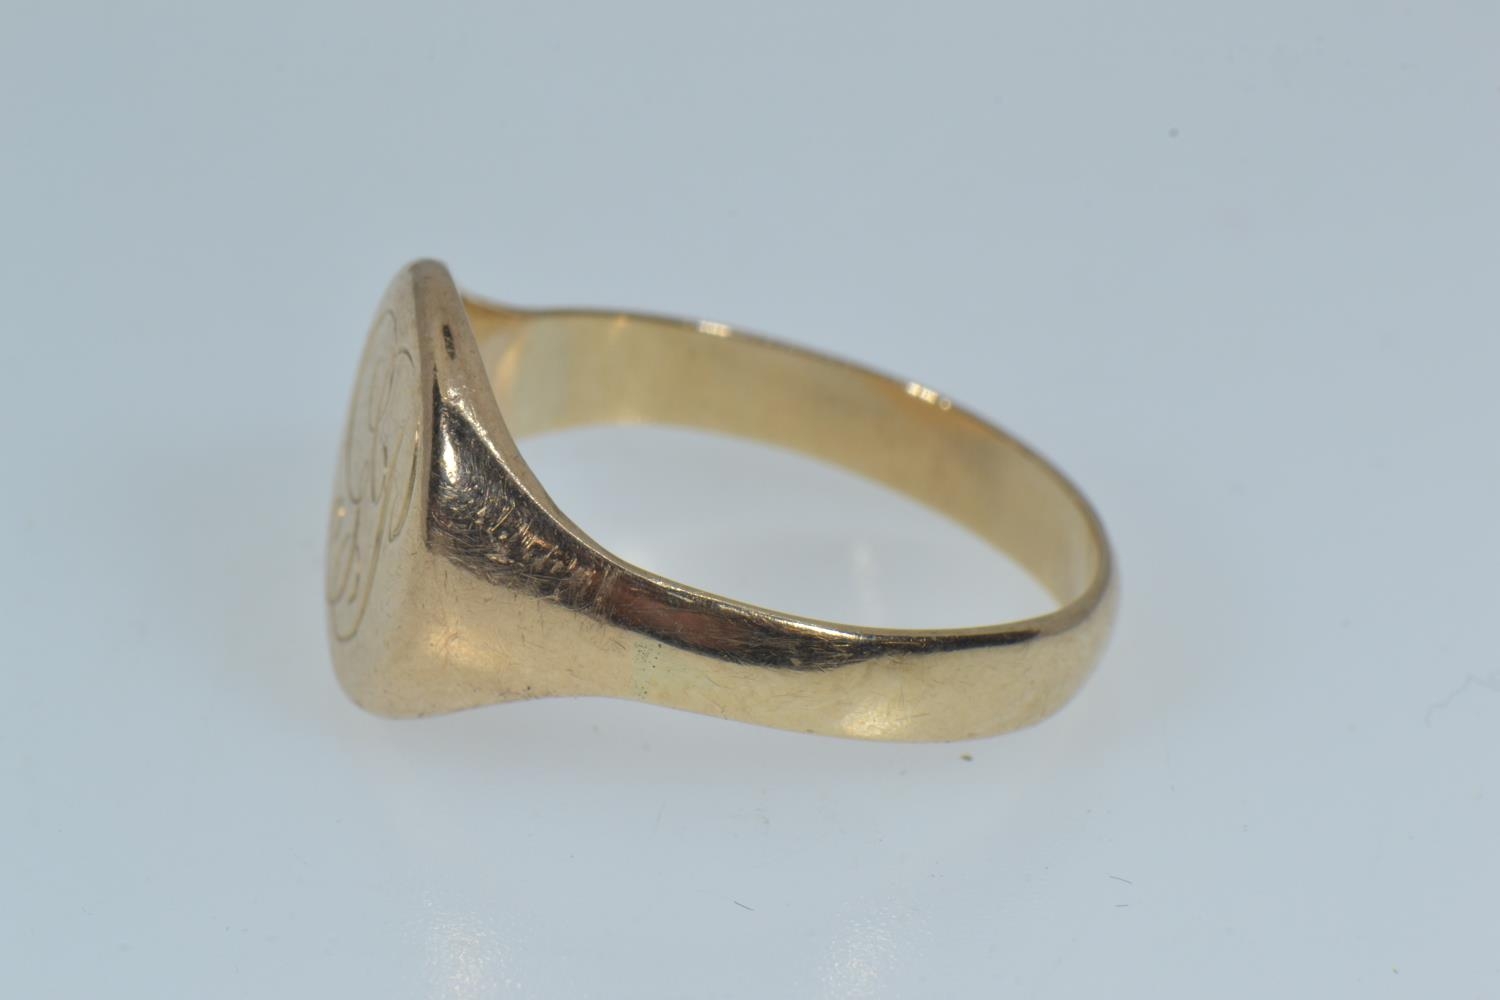 9ct gold signet ring, engraved with initials 'GP', size W1/2, 5.87 grams  - Image 2 of 4